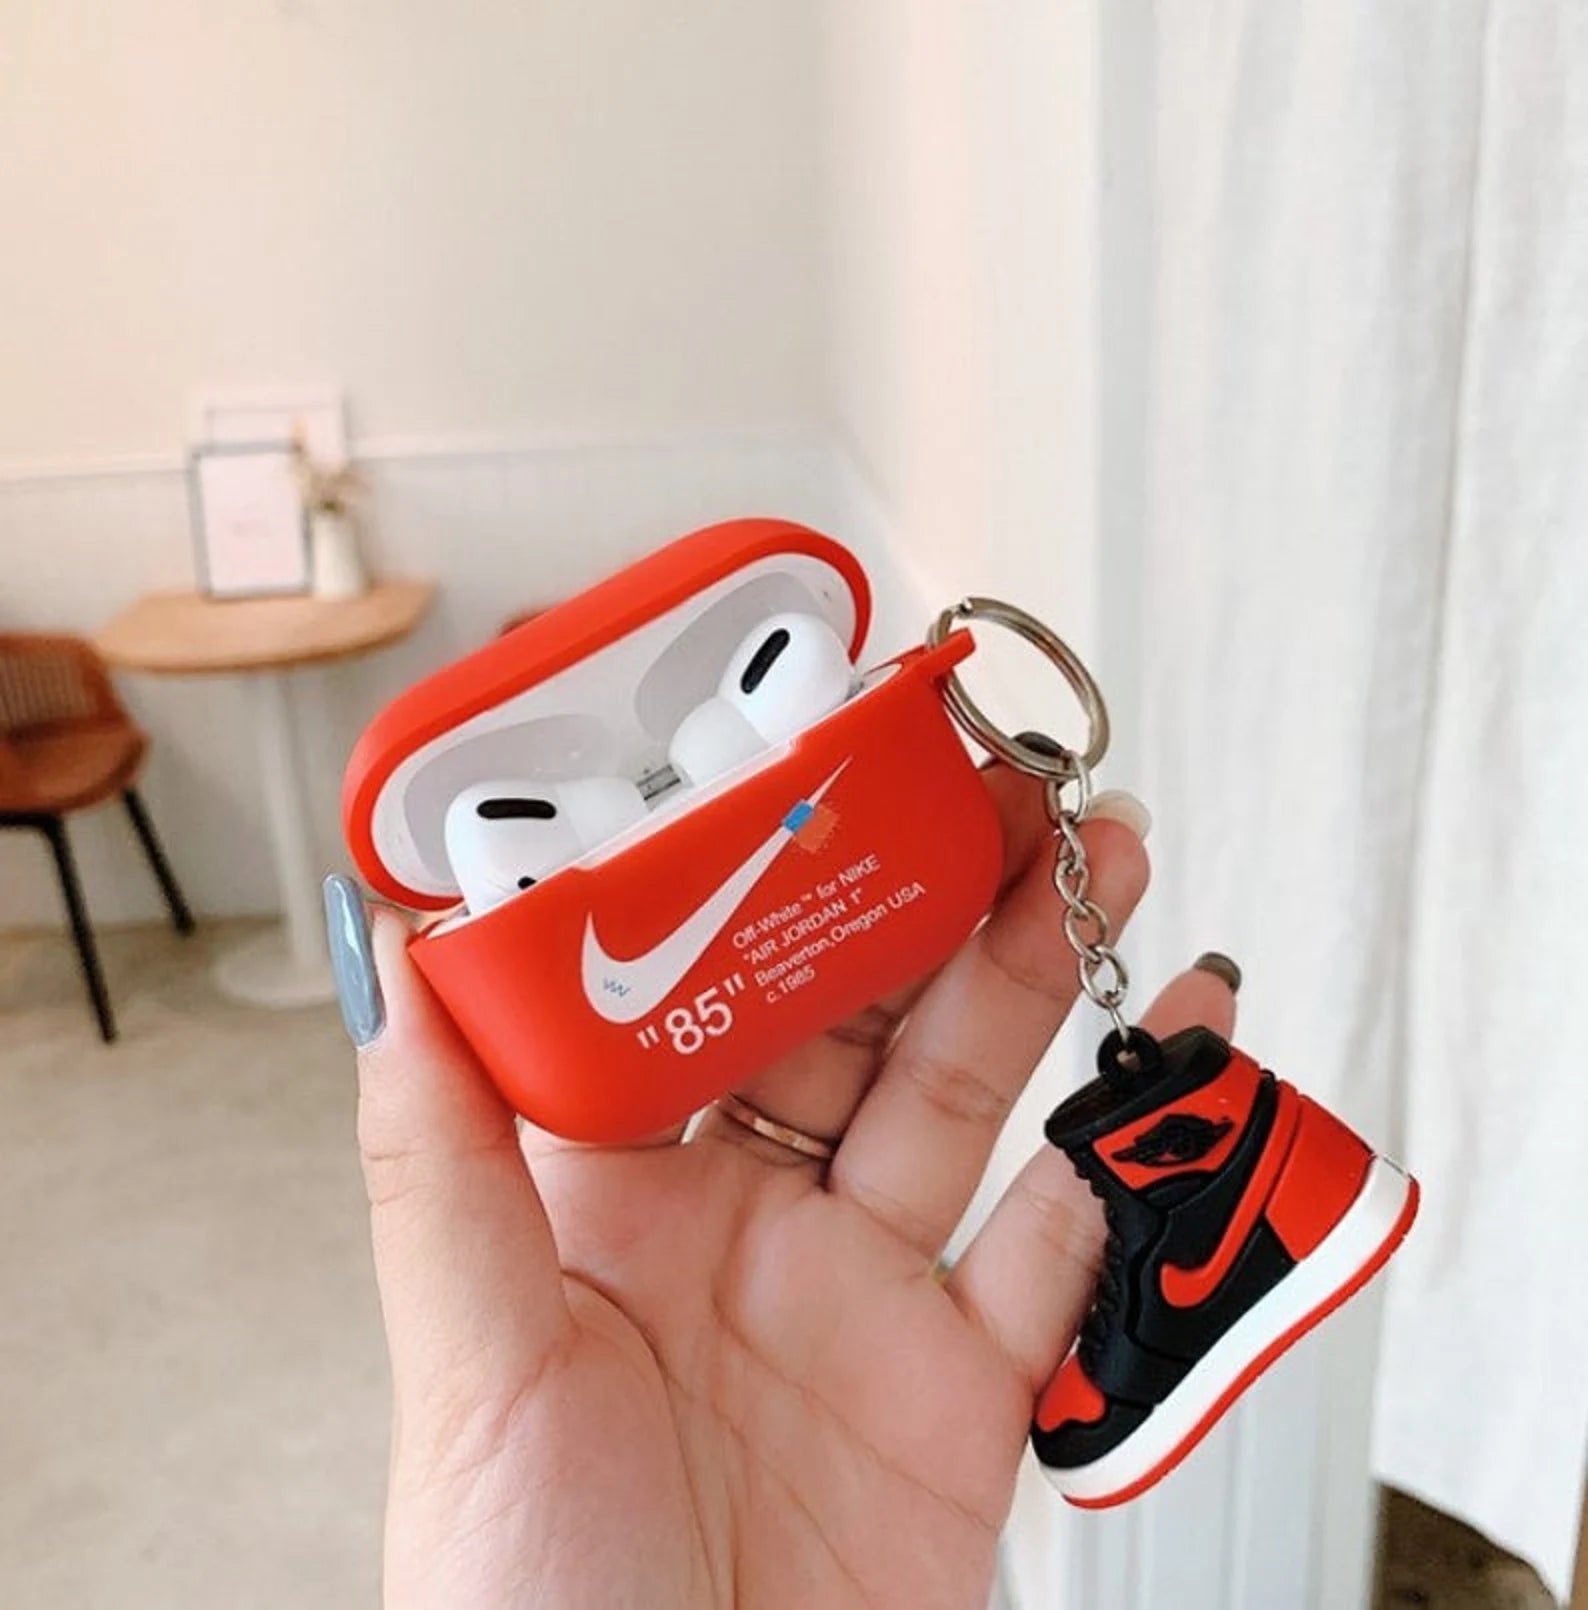 red nike airpod case